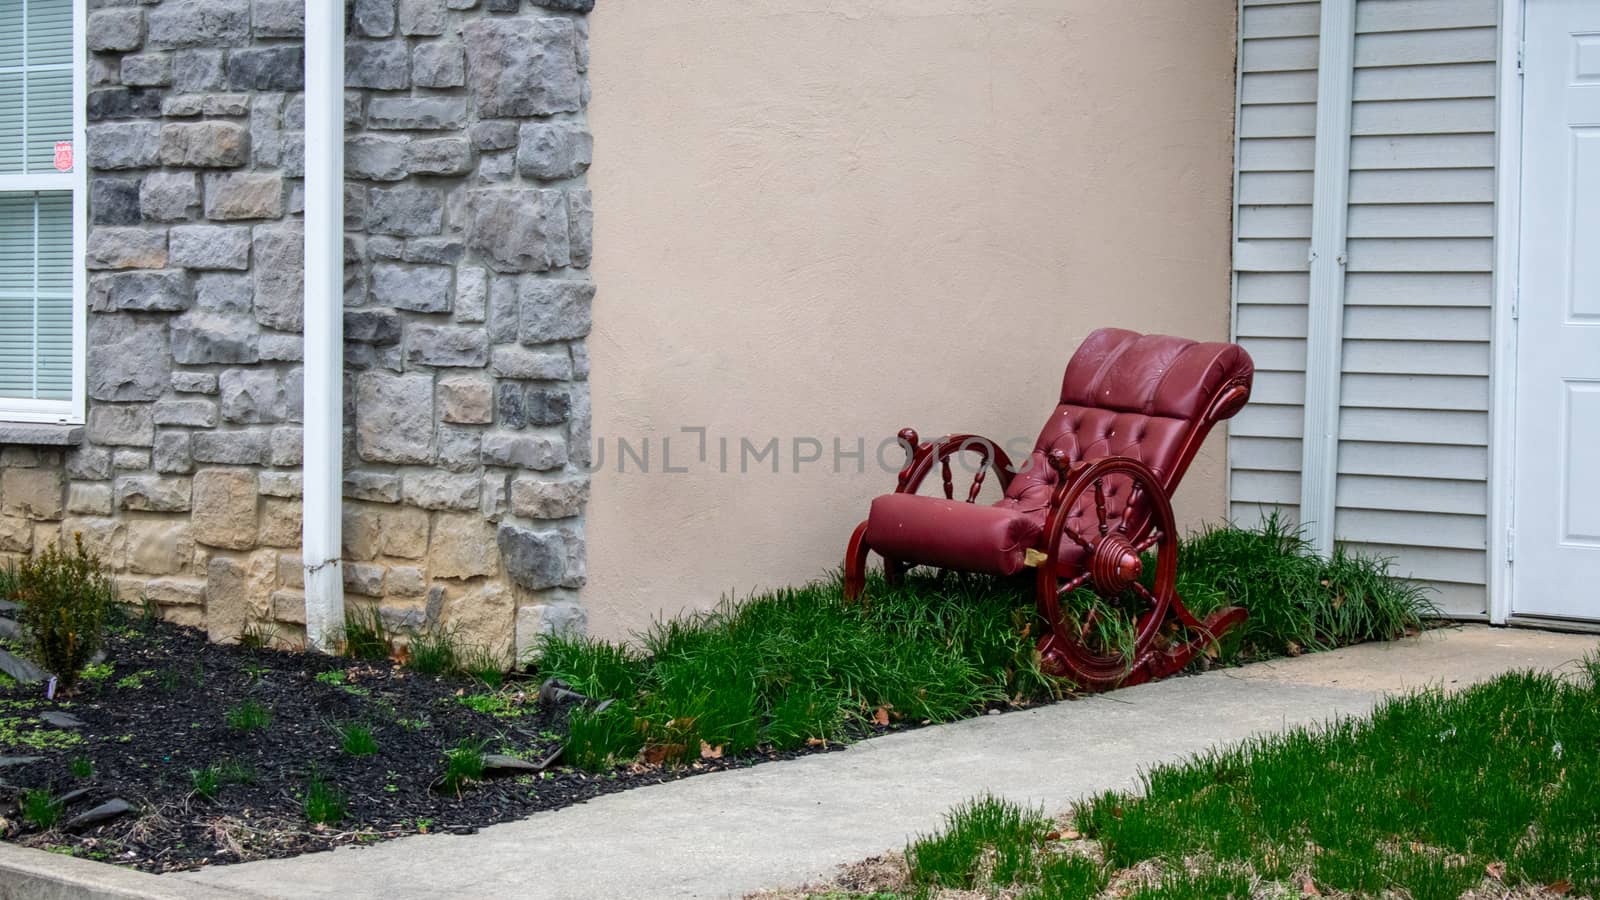 An Old-Fashioned Cushioned Red Rocking Chair Sitting in a Patch of Grass Next to a Building